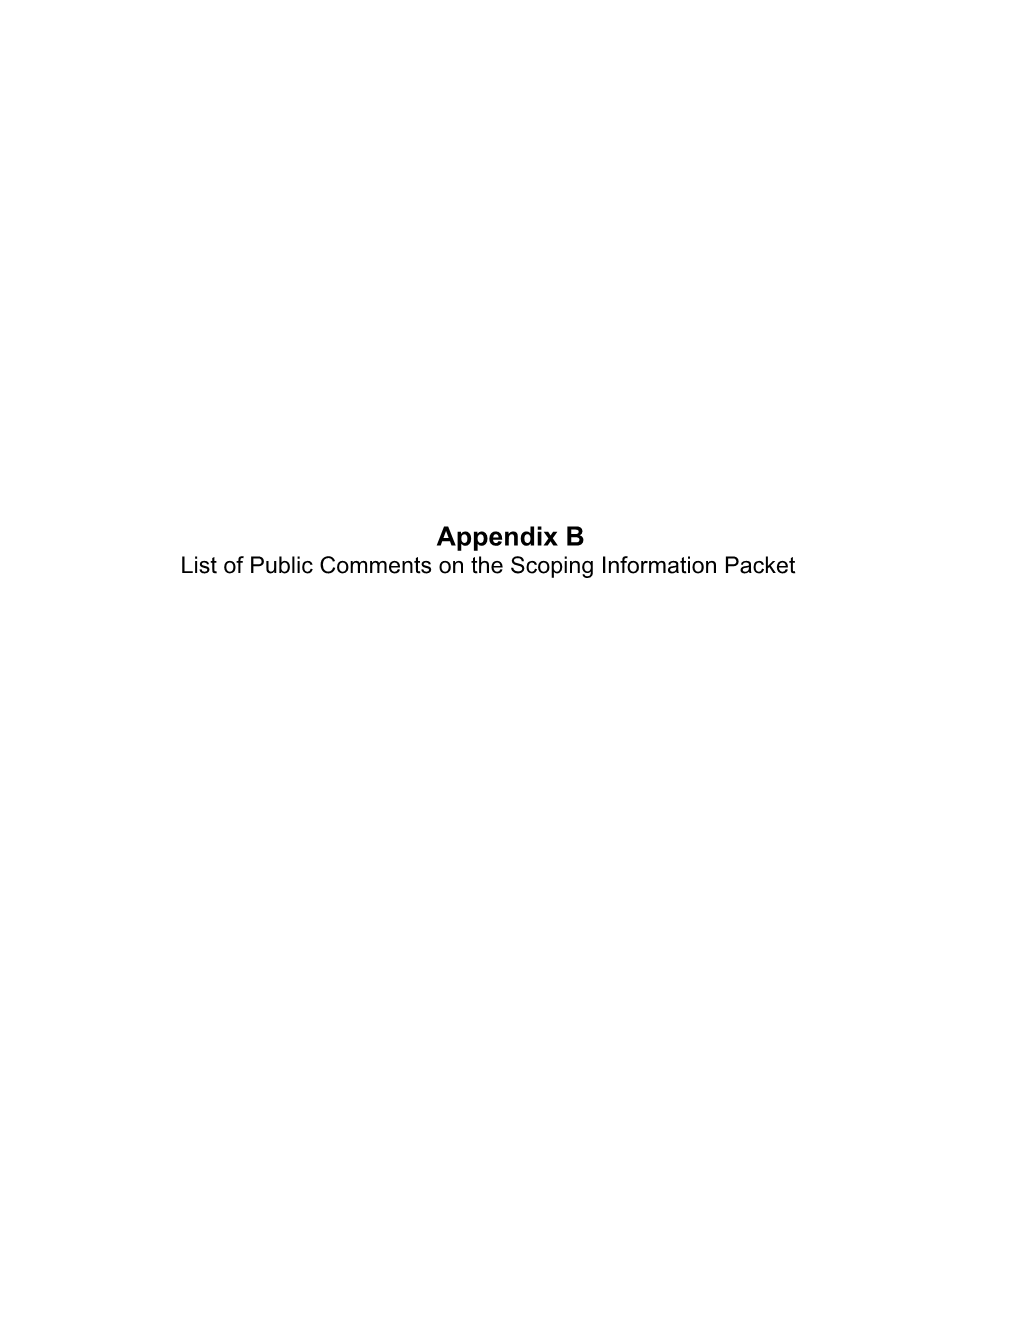 Appendix B – List of Public Comments on the Scoping Information Packet